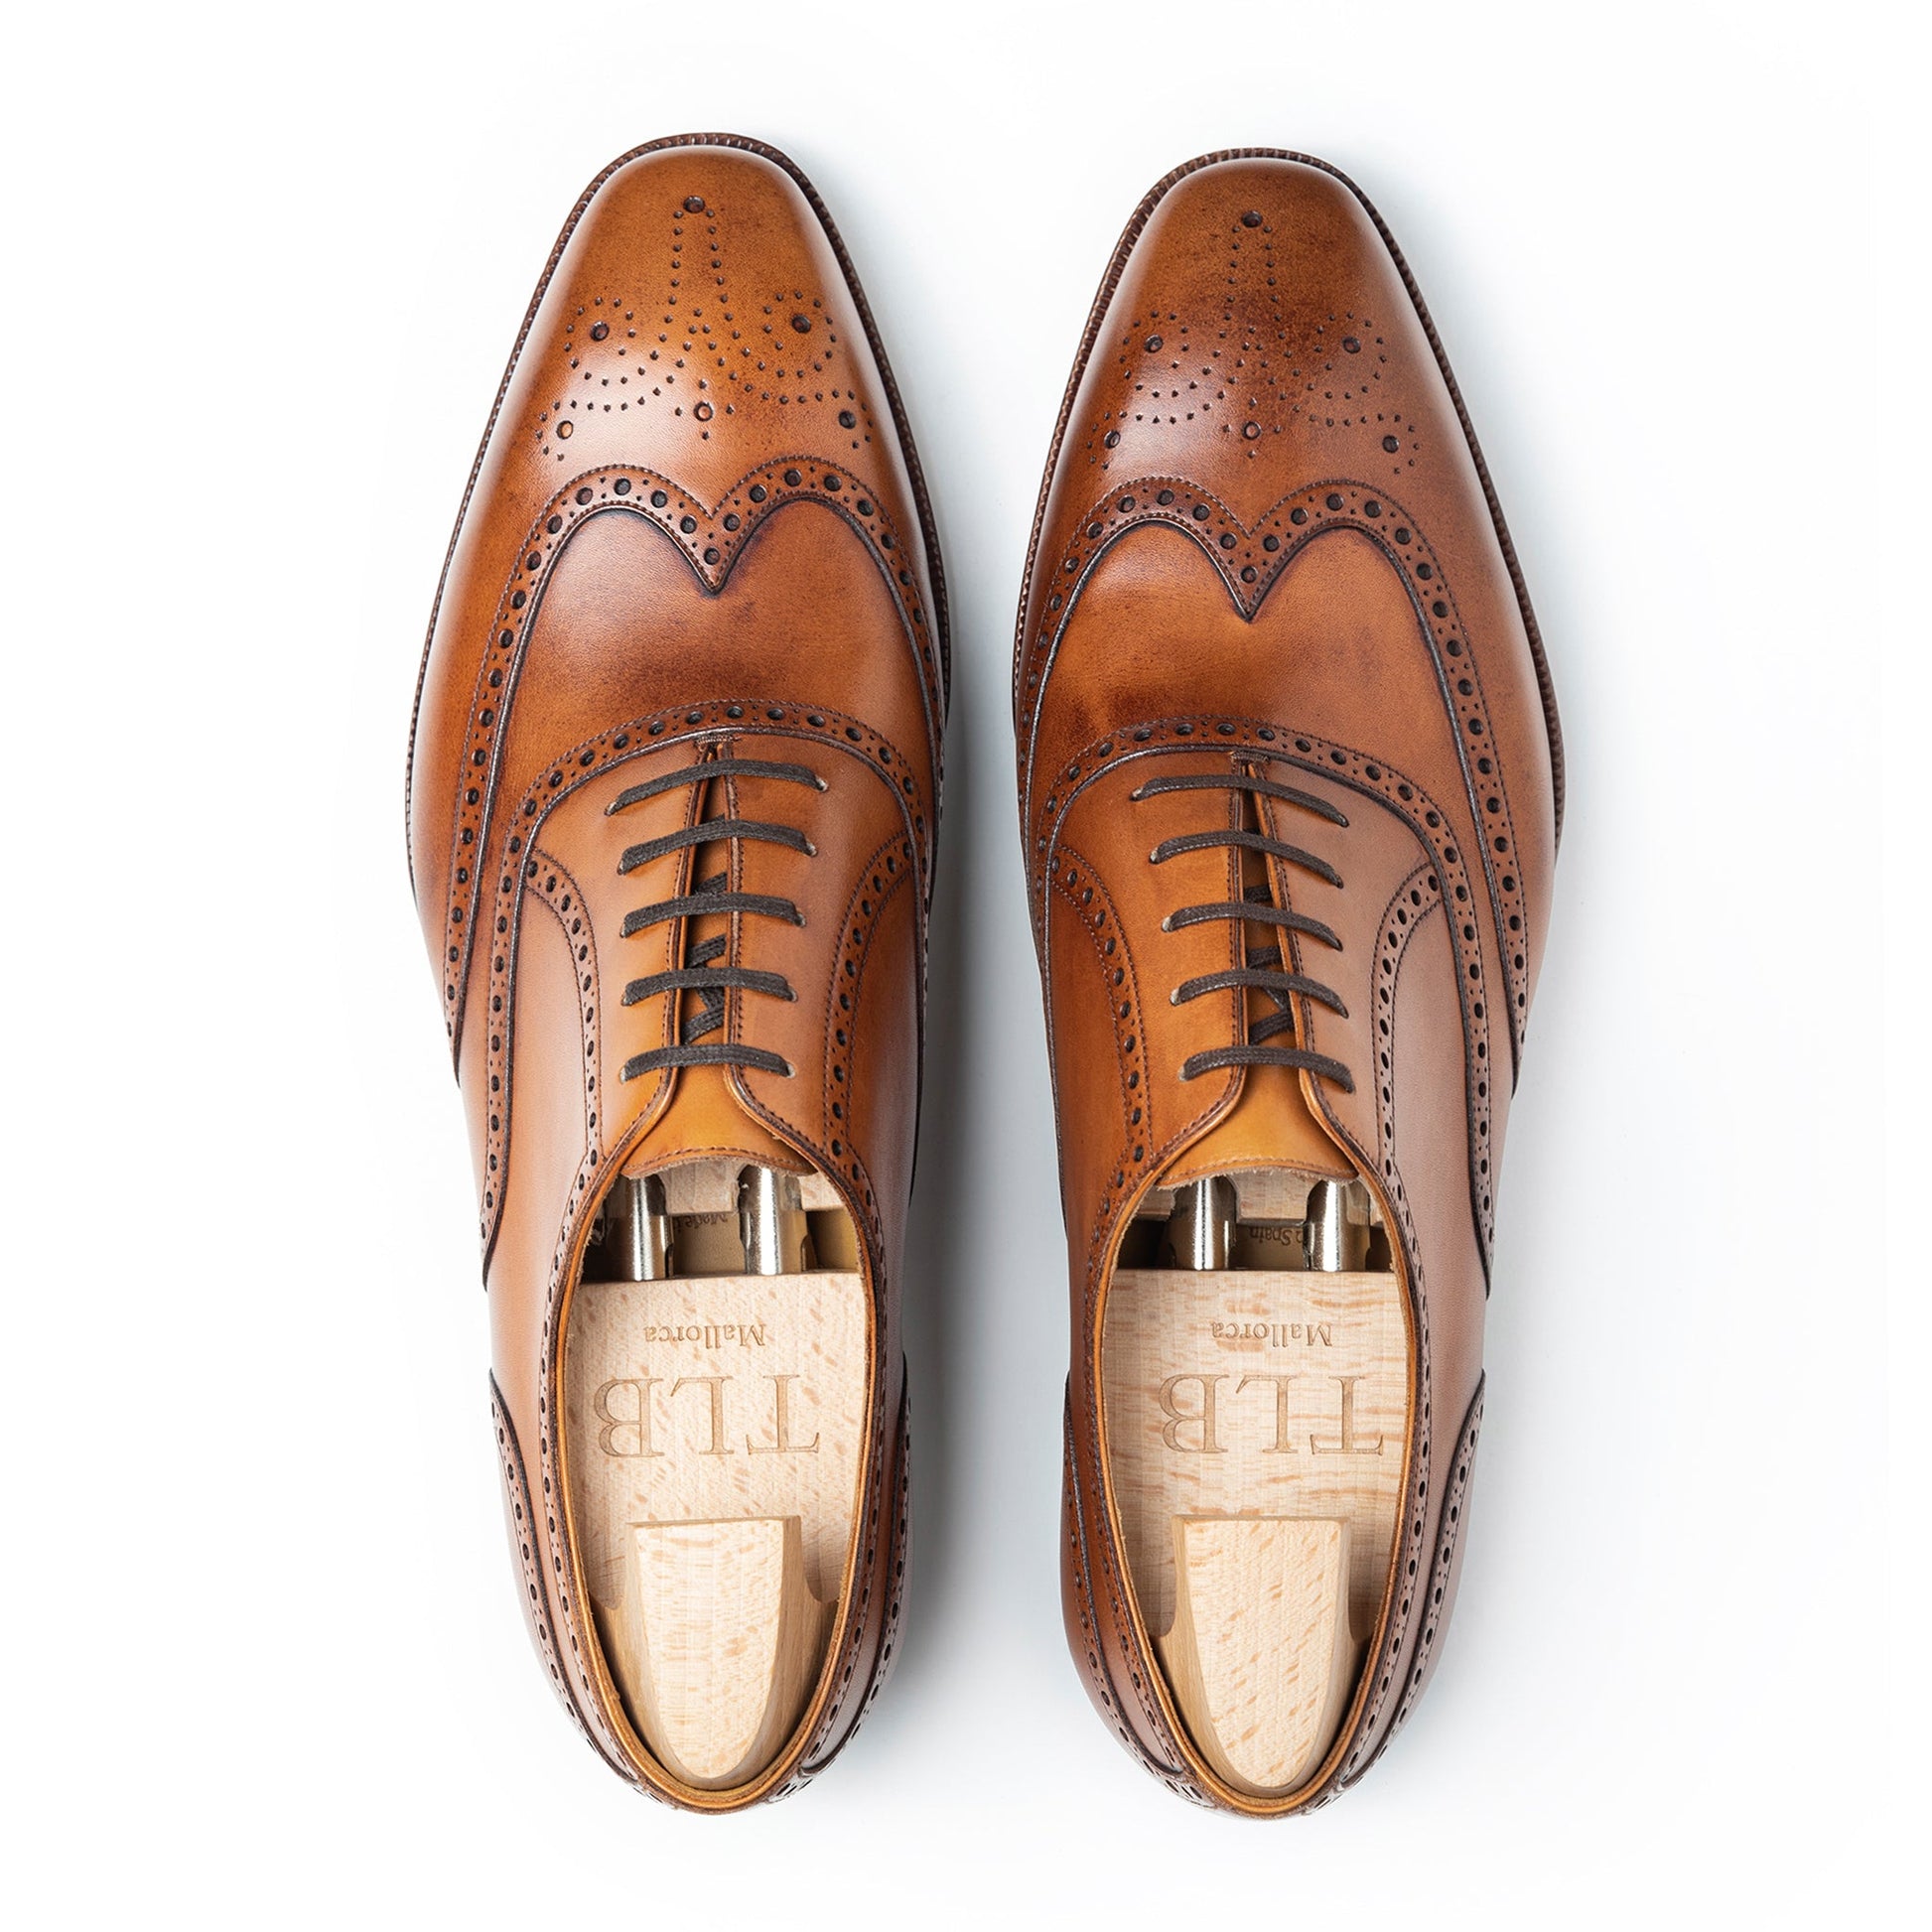 Suede Budapest brown classic brogue perforation